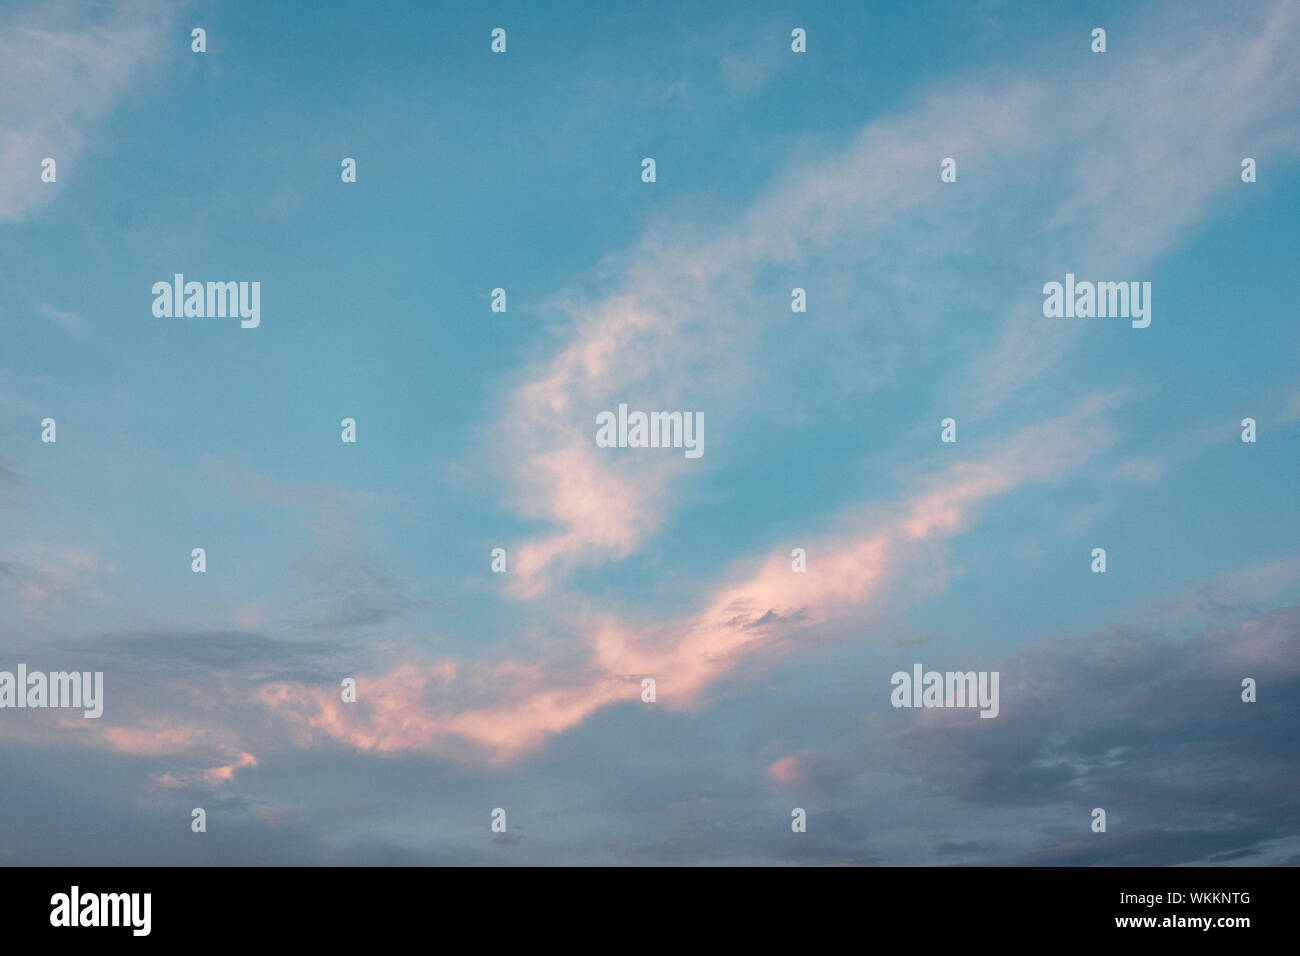 Teal blue sky overlay background with clouds Stock Photo